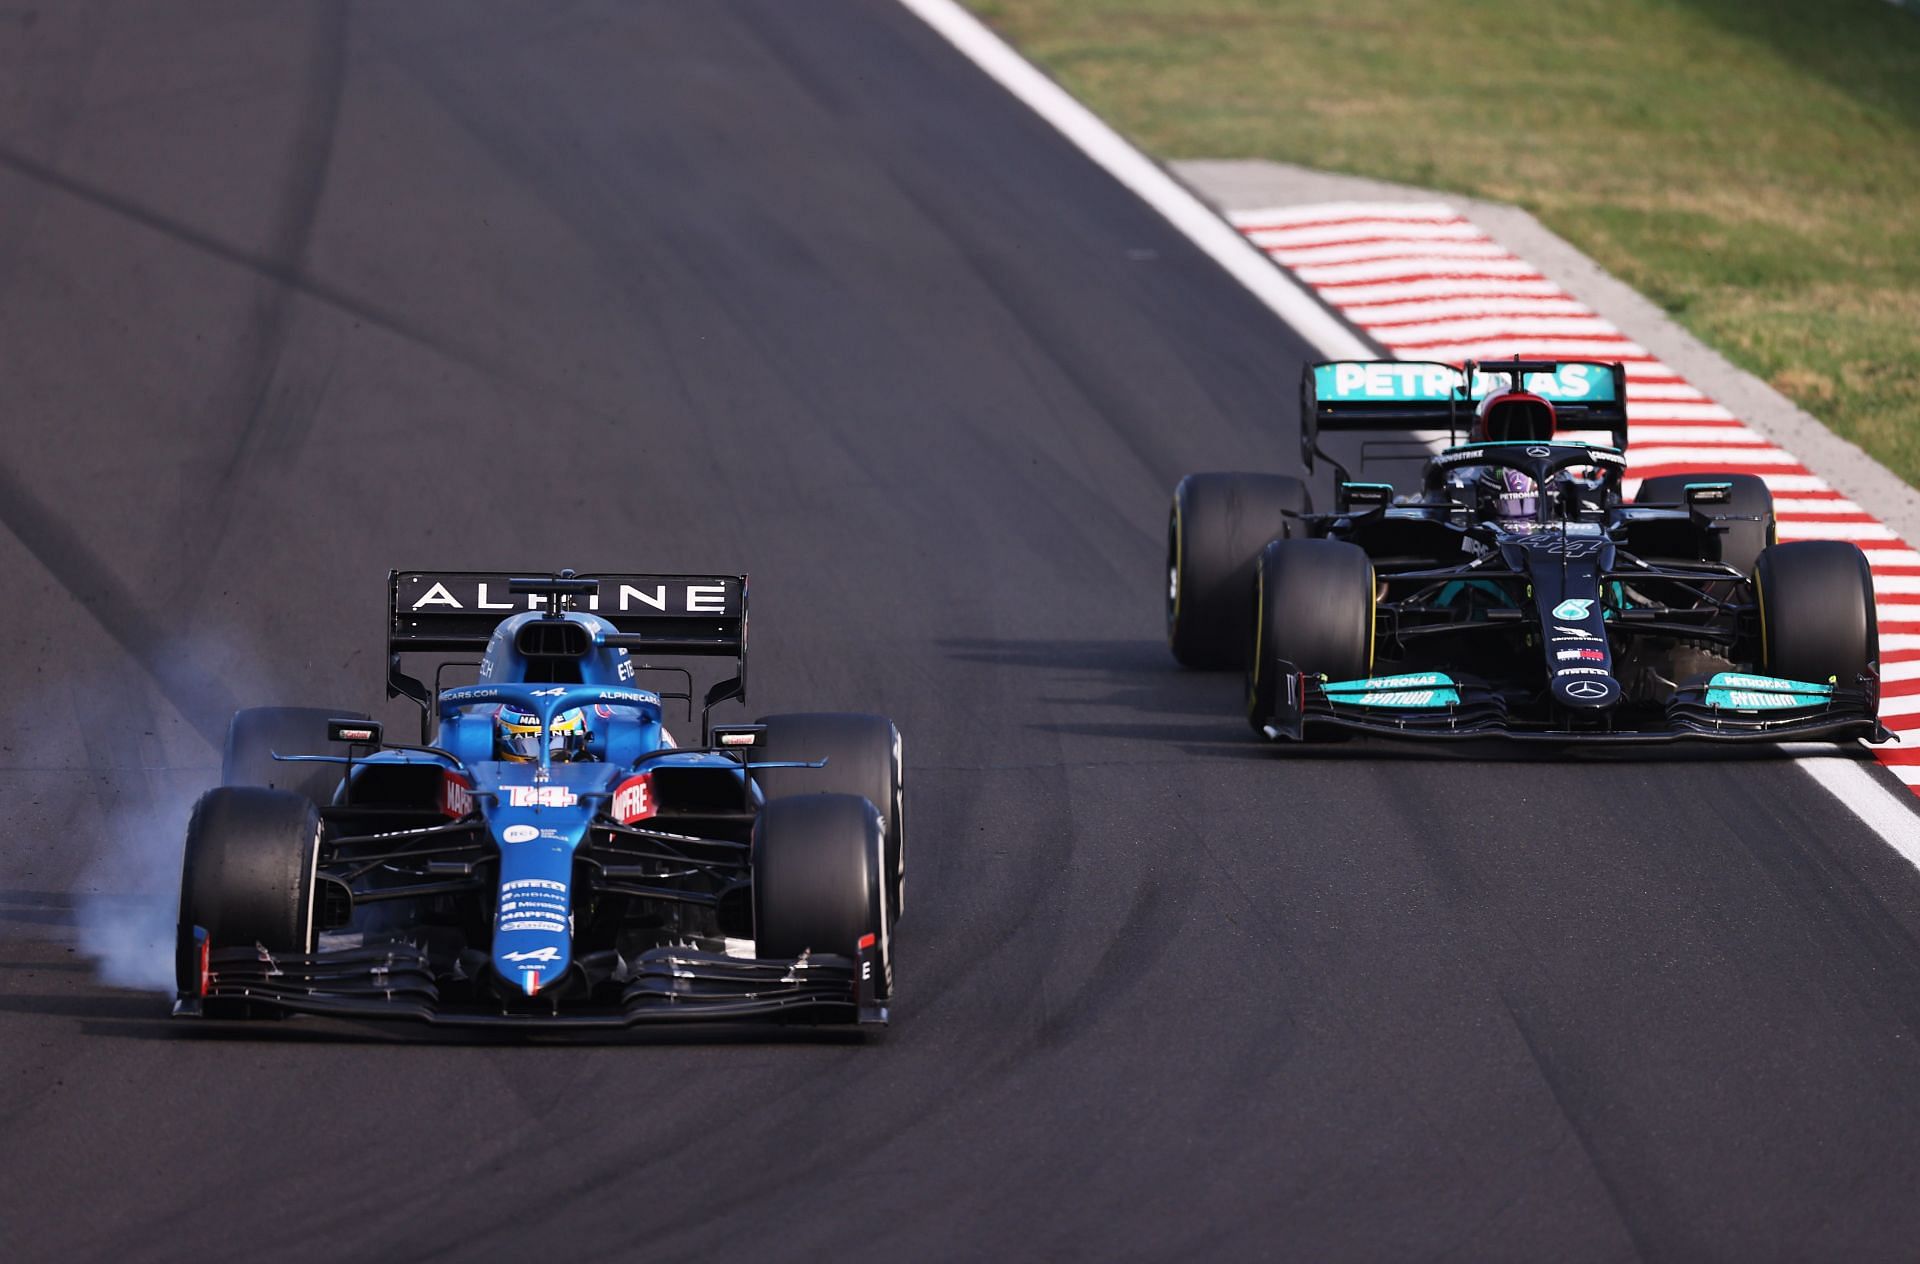 Fernando Alonso locks-up while defending from Lewis Hamilton during the 2021 F1 Hungarian Grand Prix (Photo by Lars Baron/Getty Images)